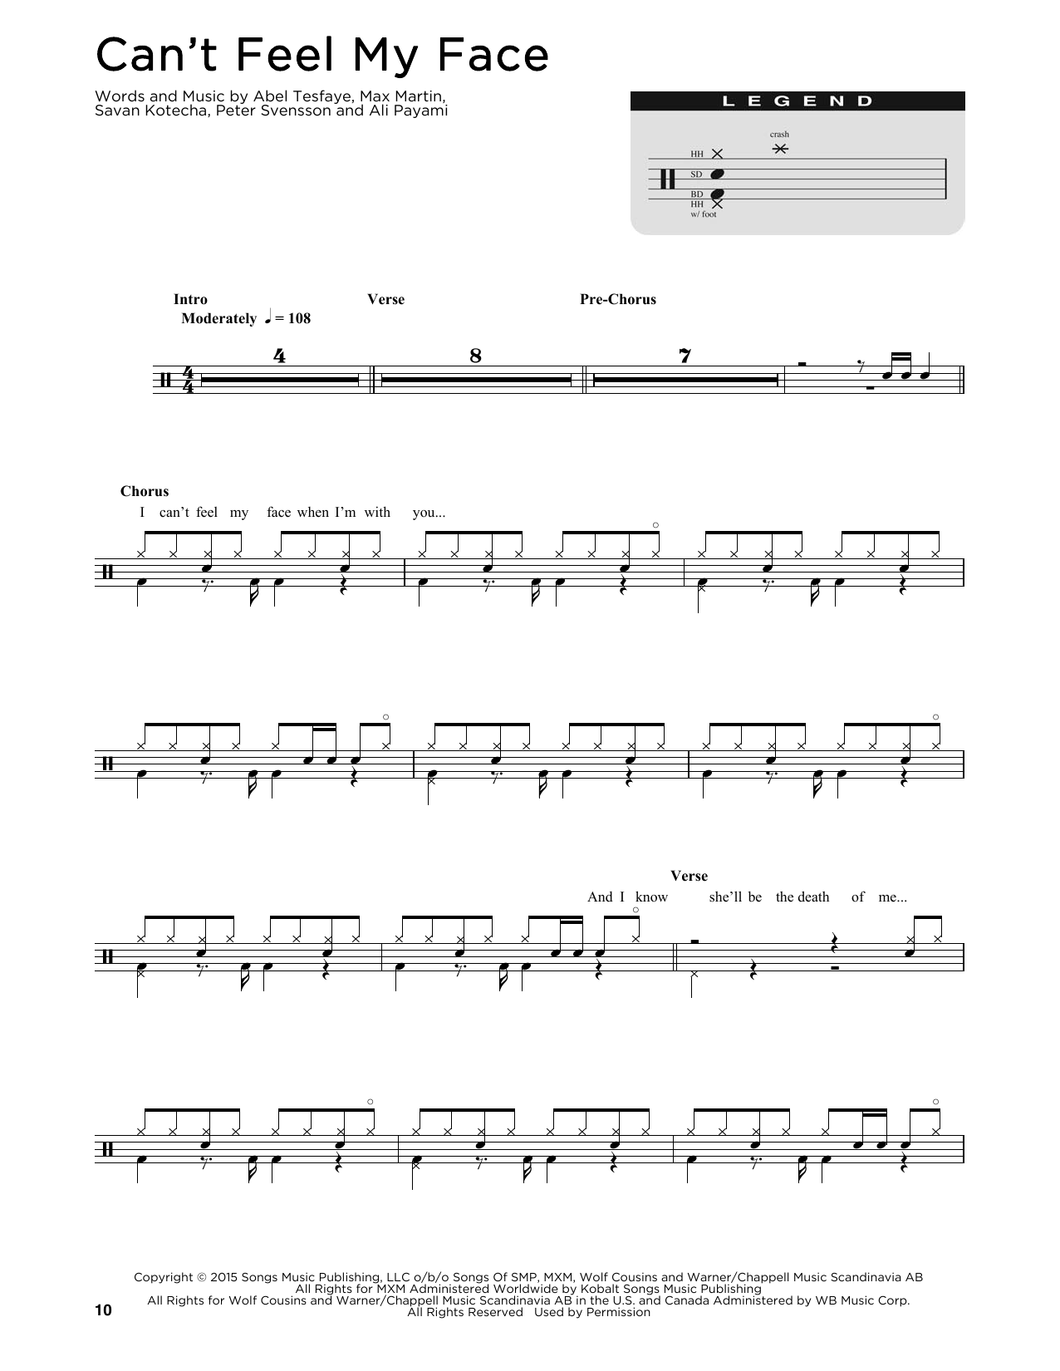 Can't Feel My Face - The Weeknd - Full Drum Transcription / Drum Sheet Music - SheetMusicDirect D